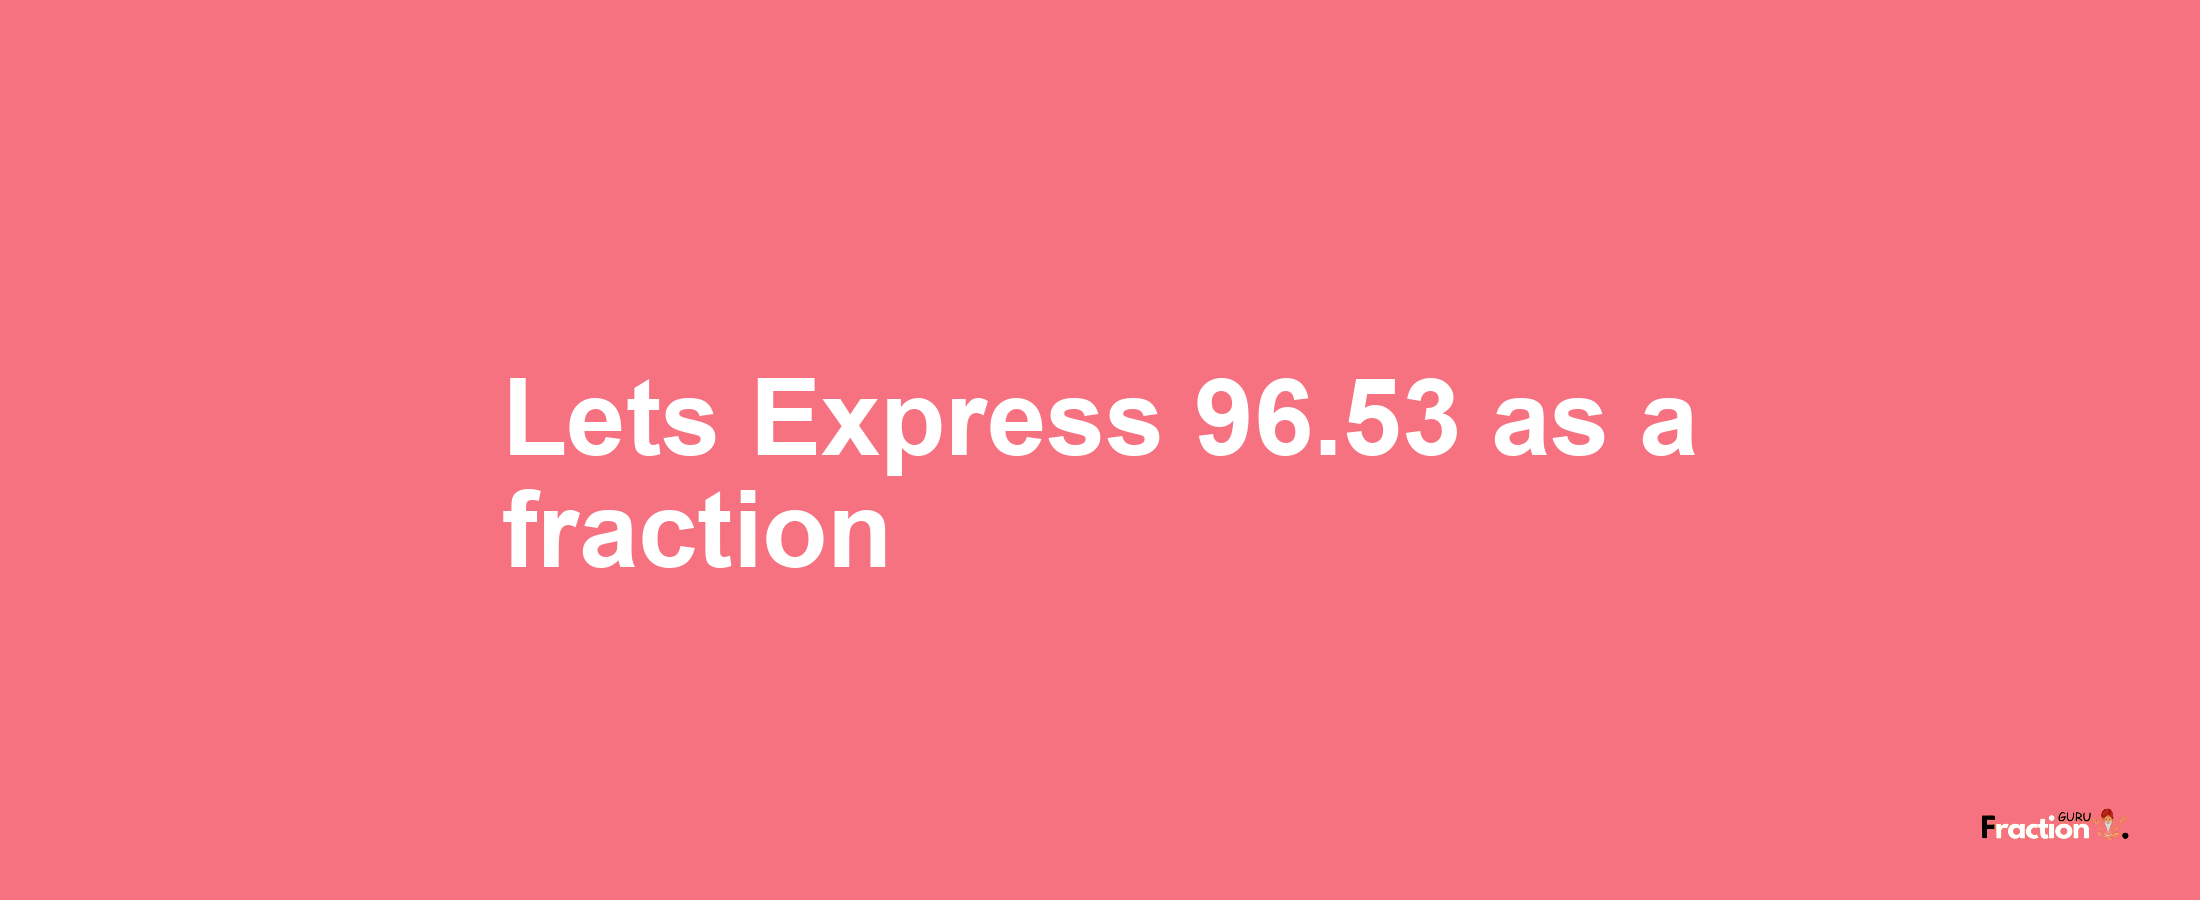 Lets Express 96.53 as afraction